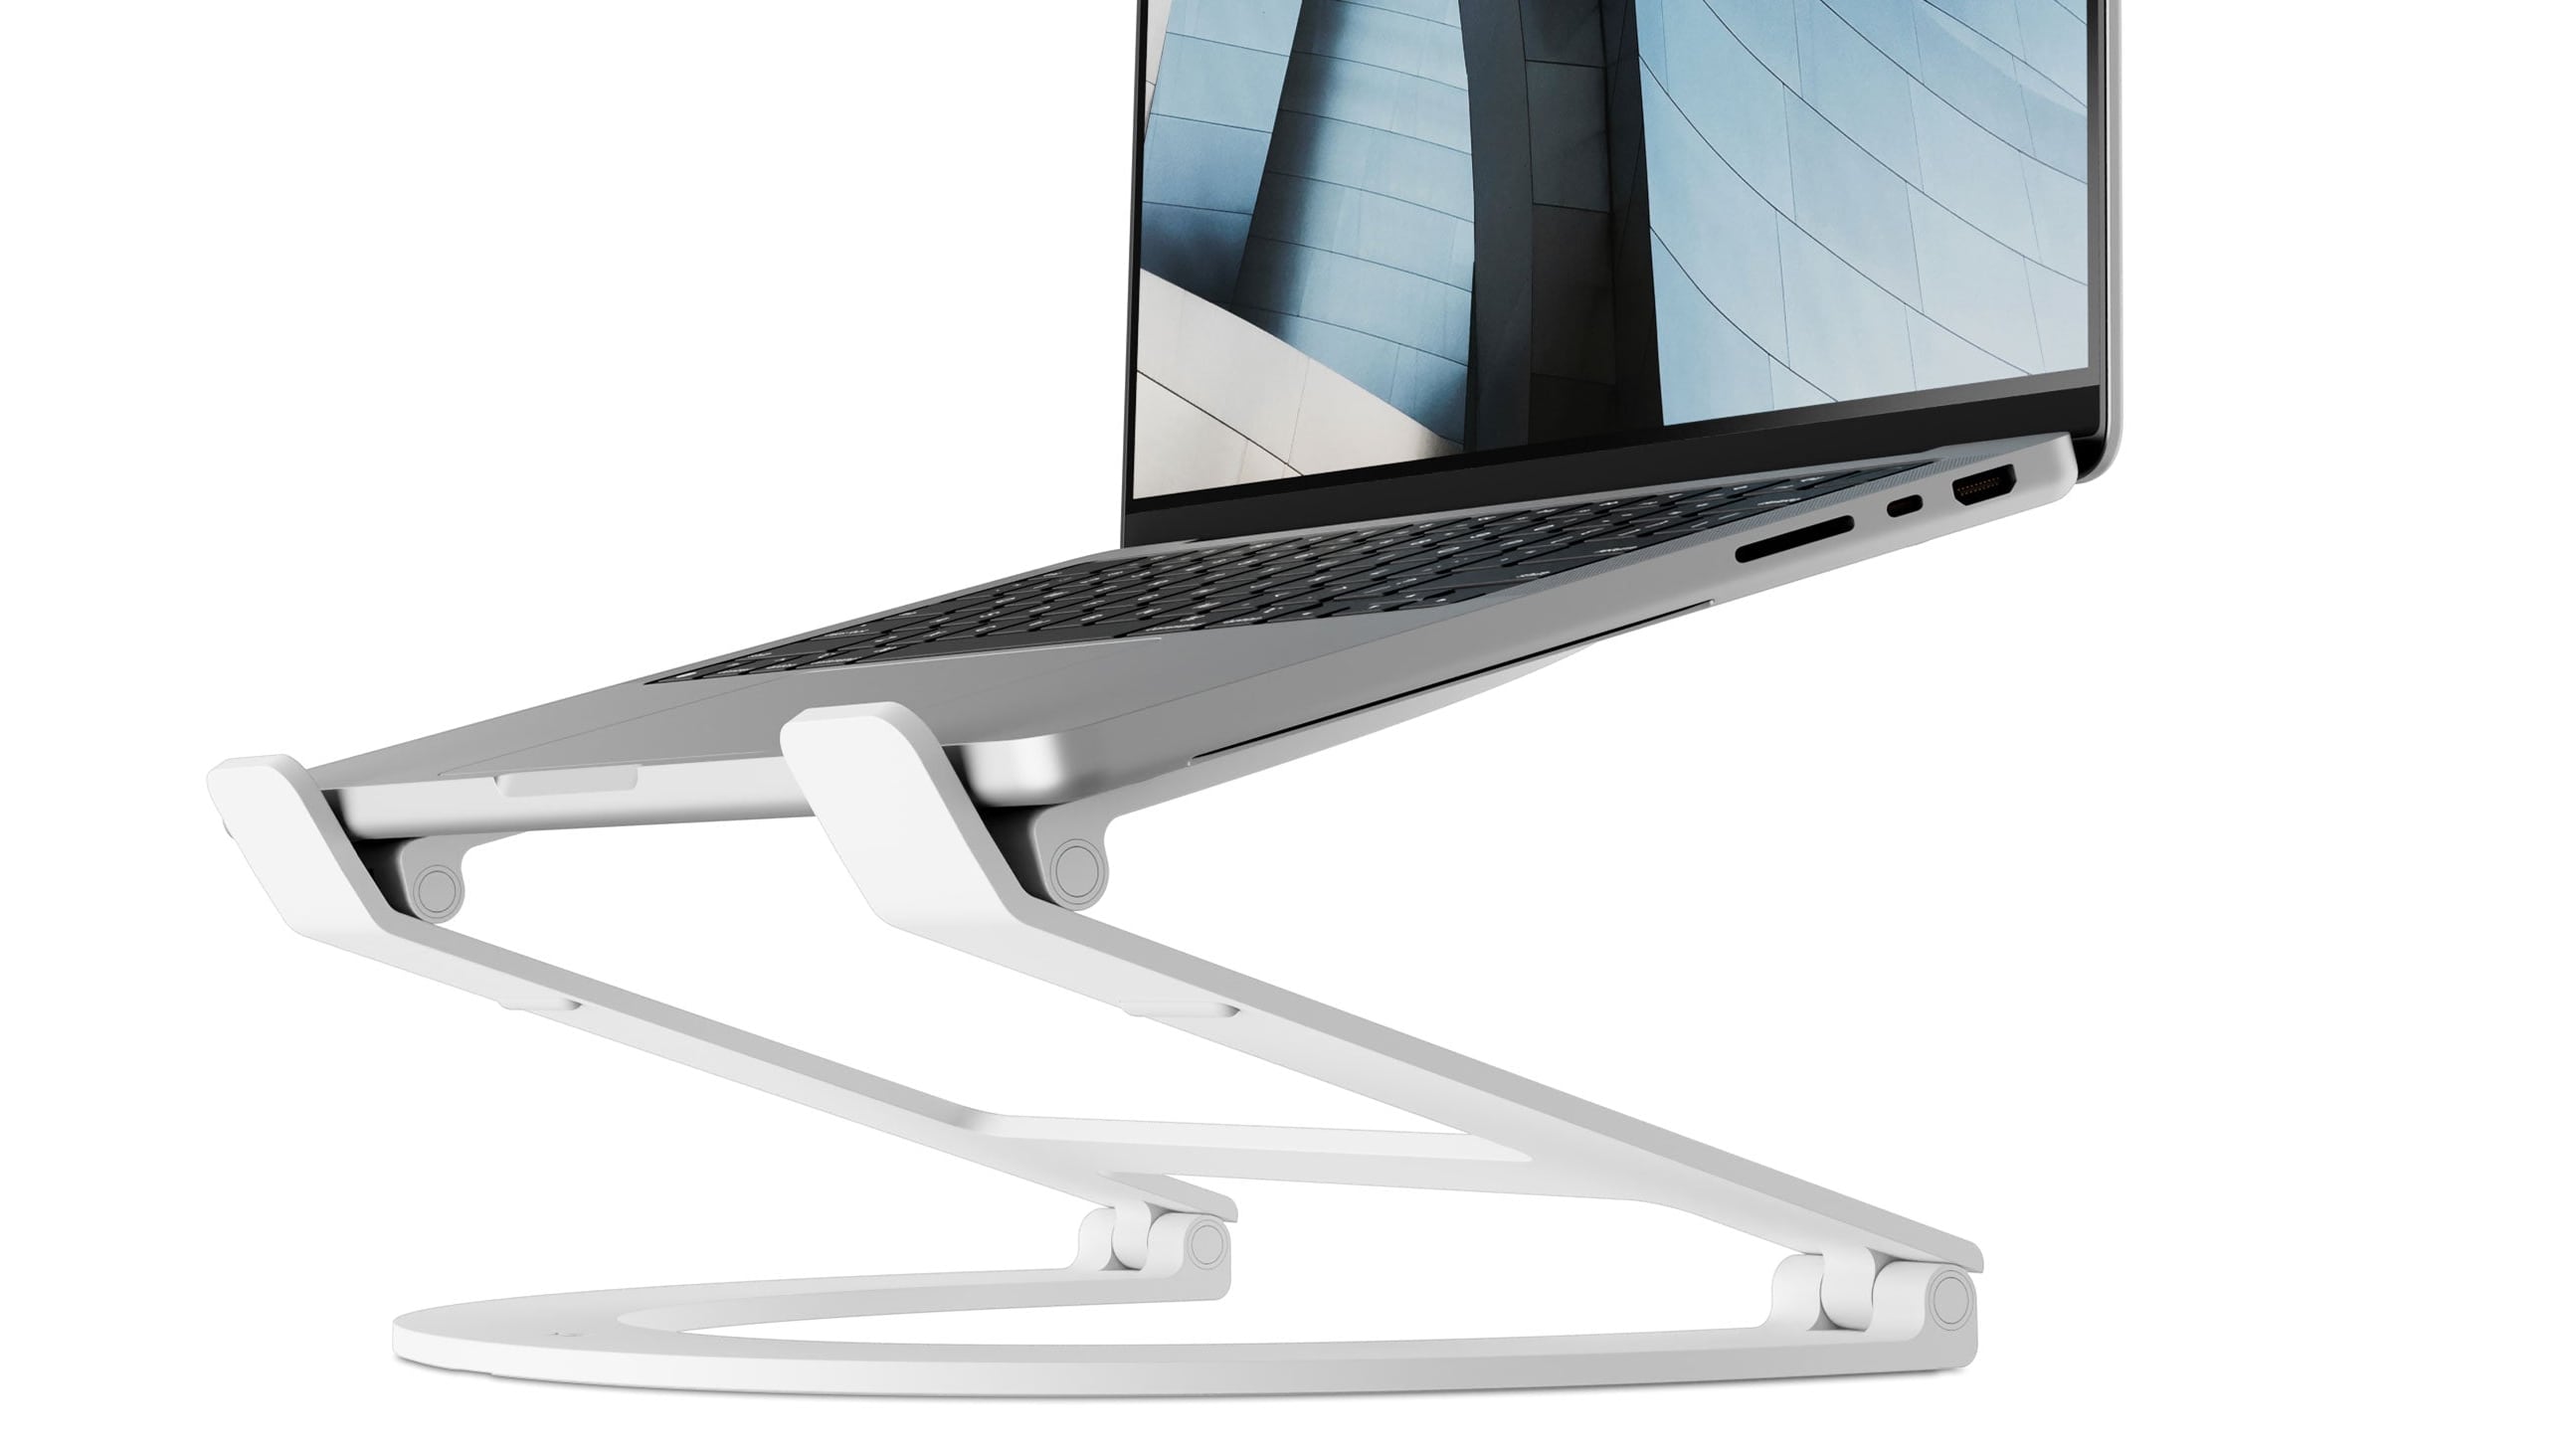 Twelve South's Curve Flex stand lets you adjusts the keyboard angle from 0 to 45 degrees